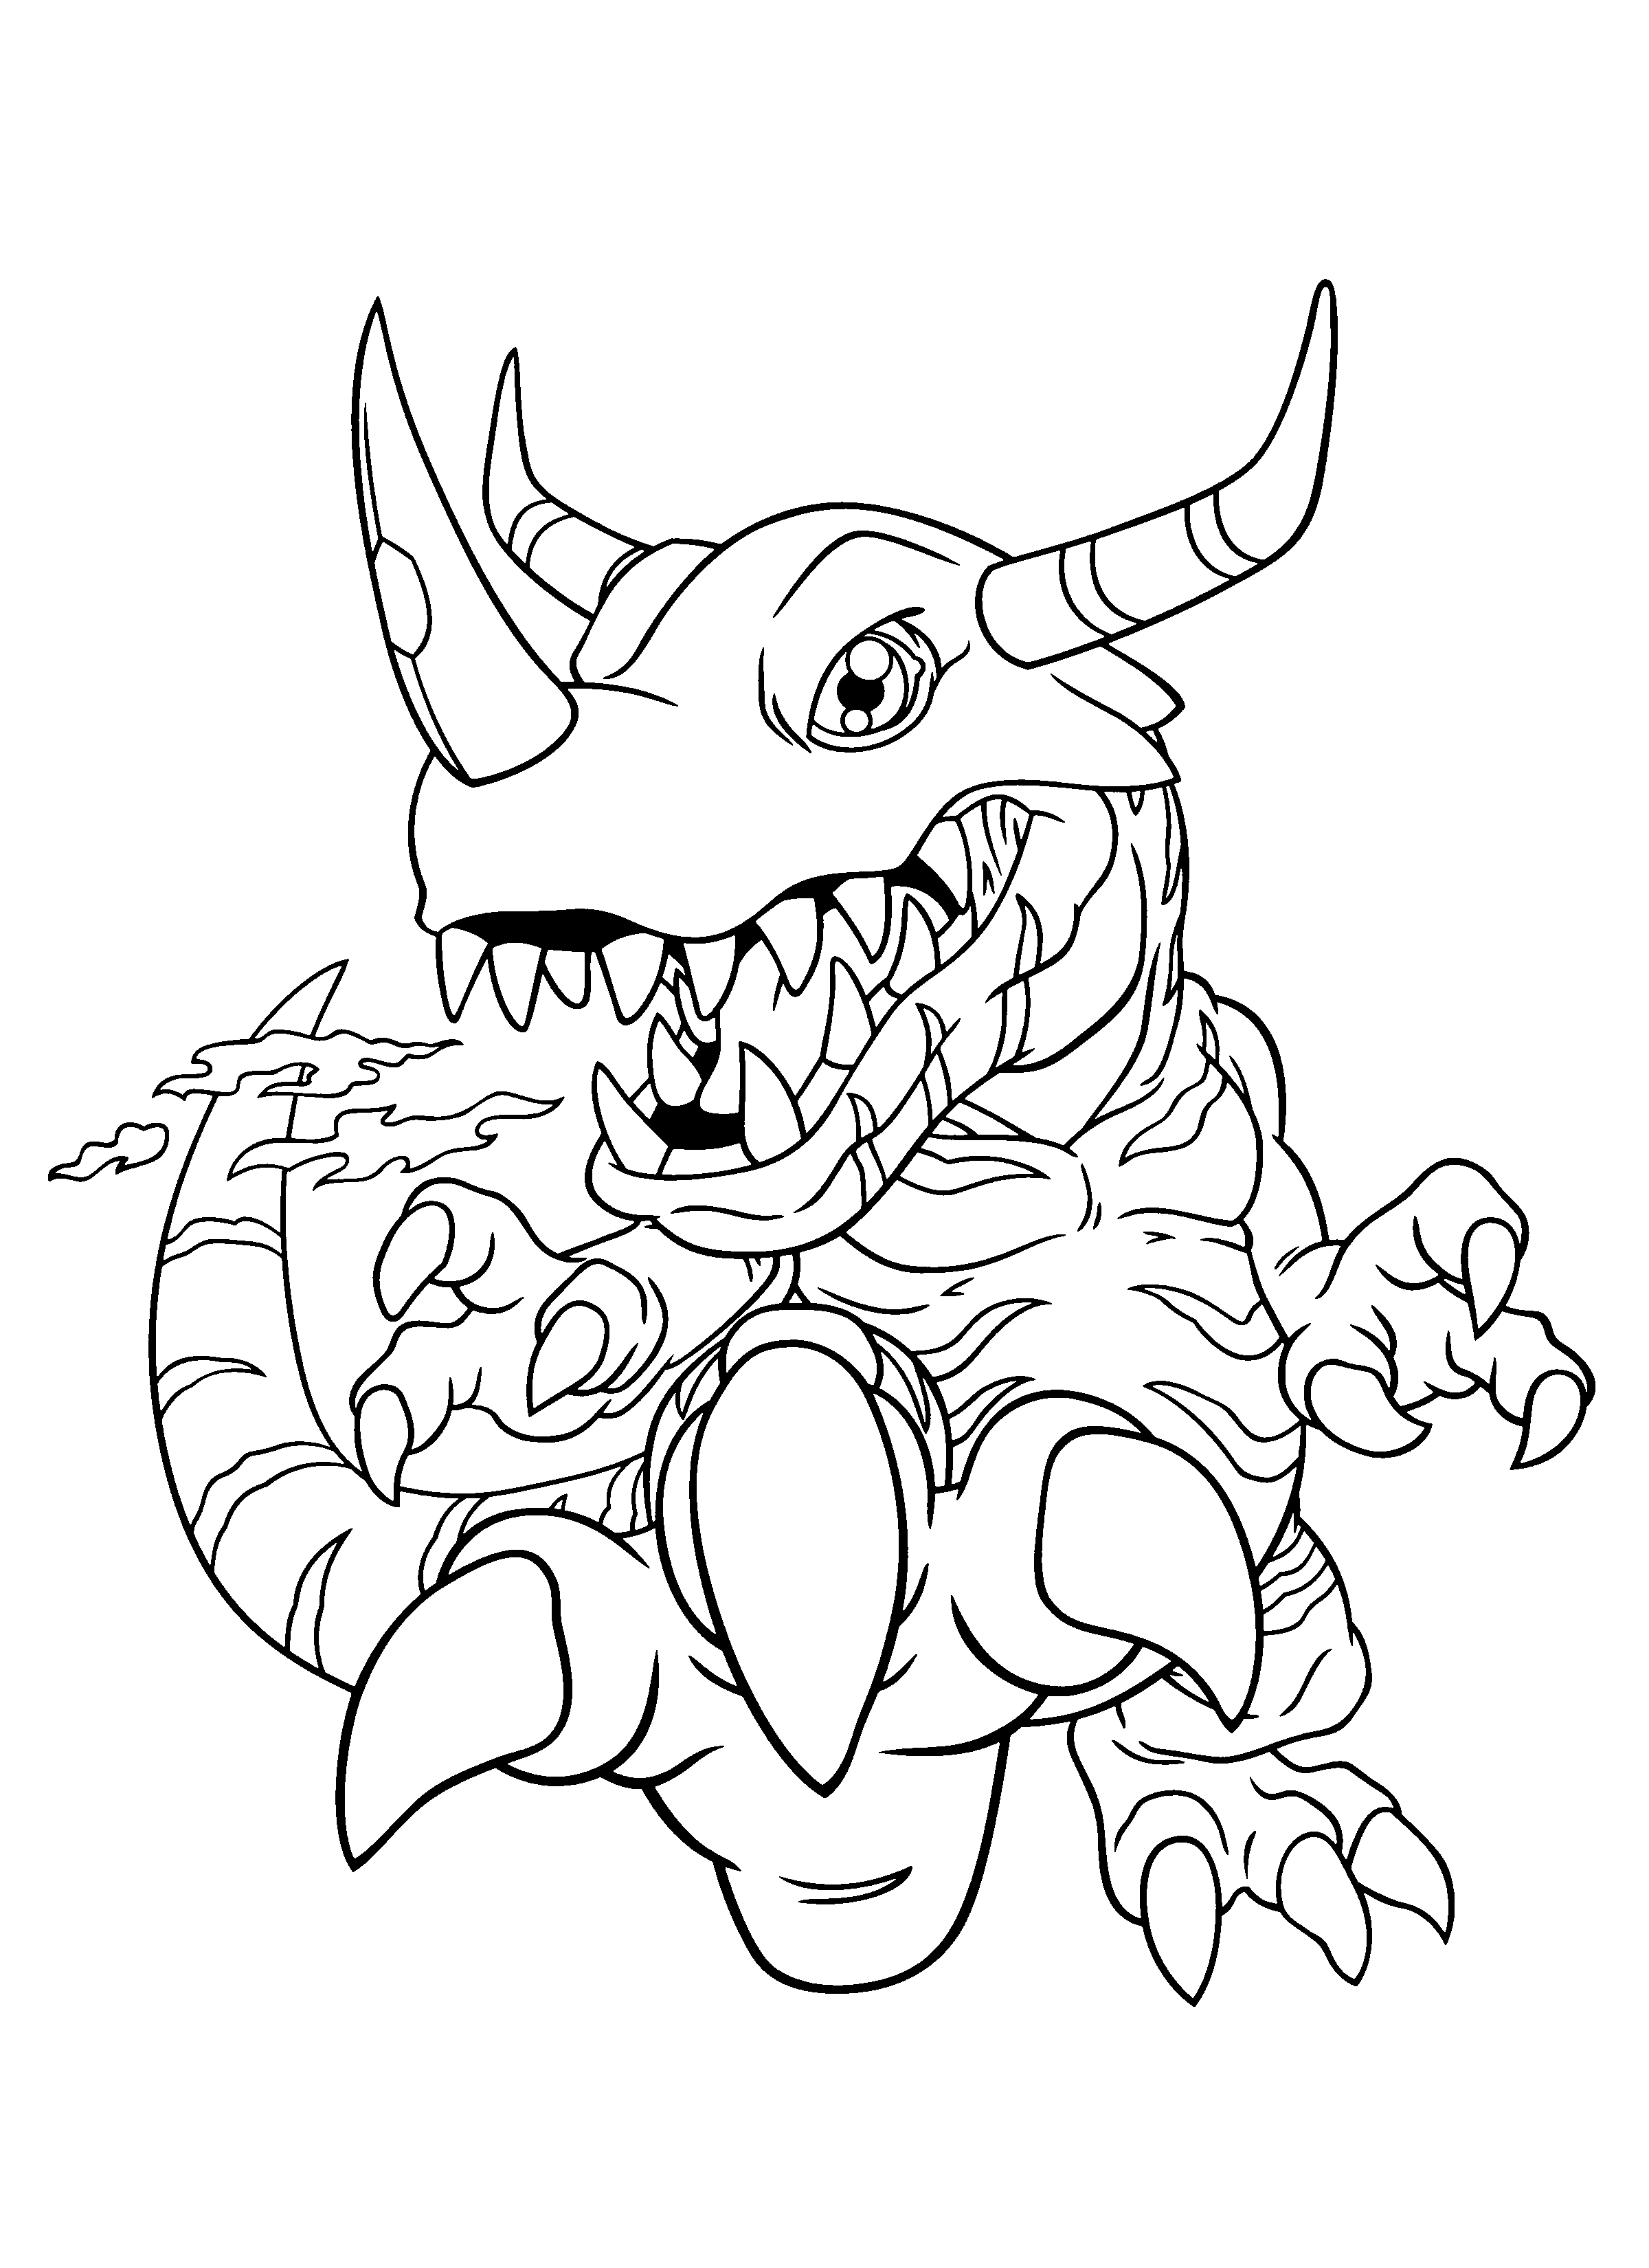 digimon coloring pages graumon